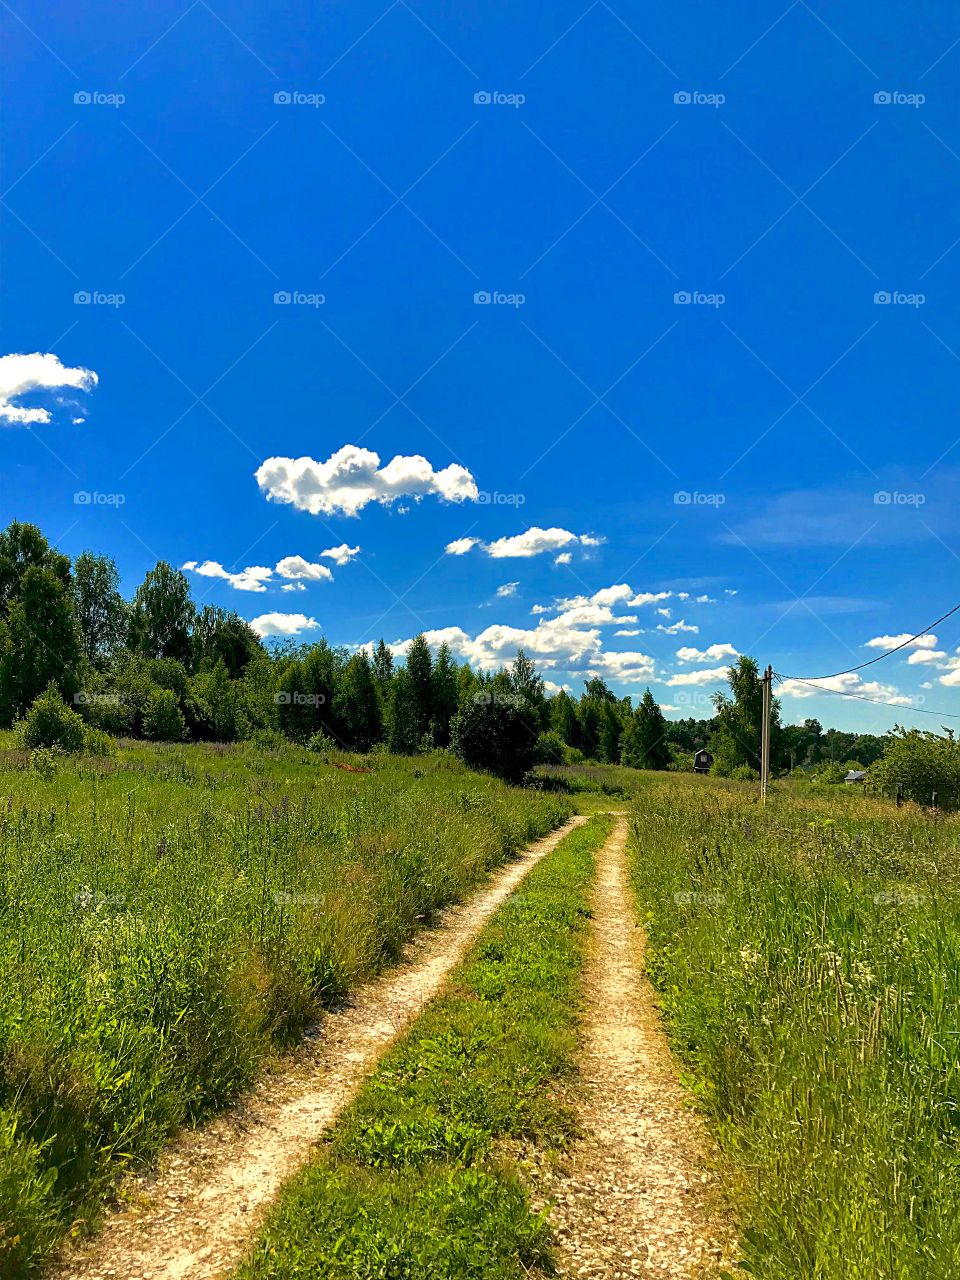 road with clouds on a summer day